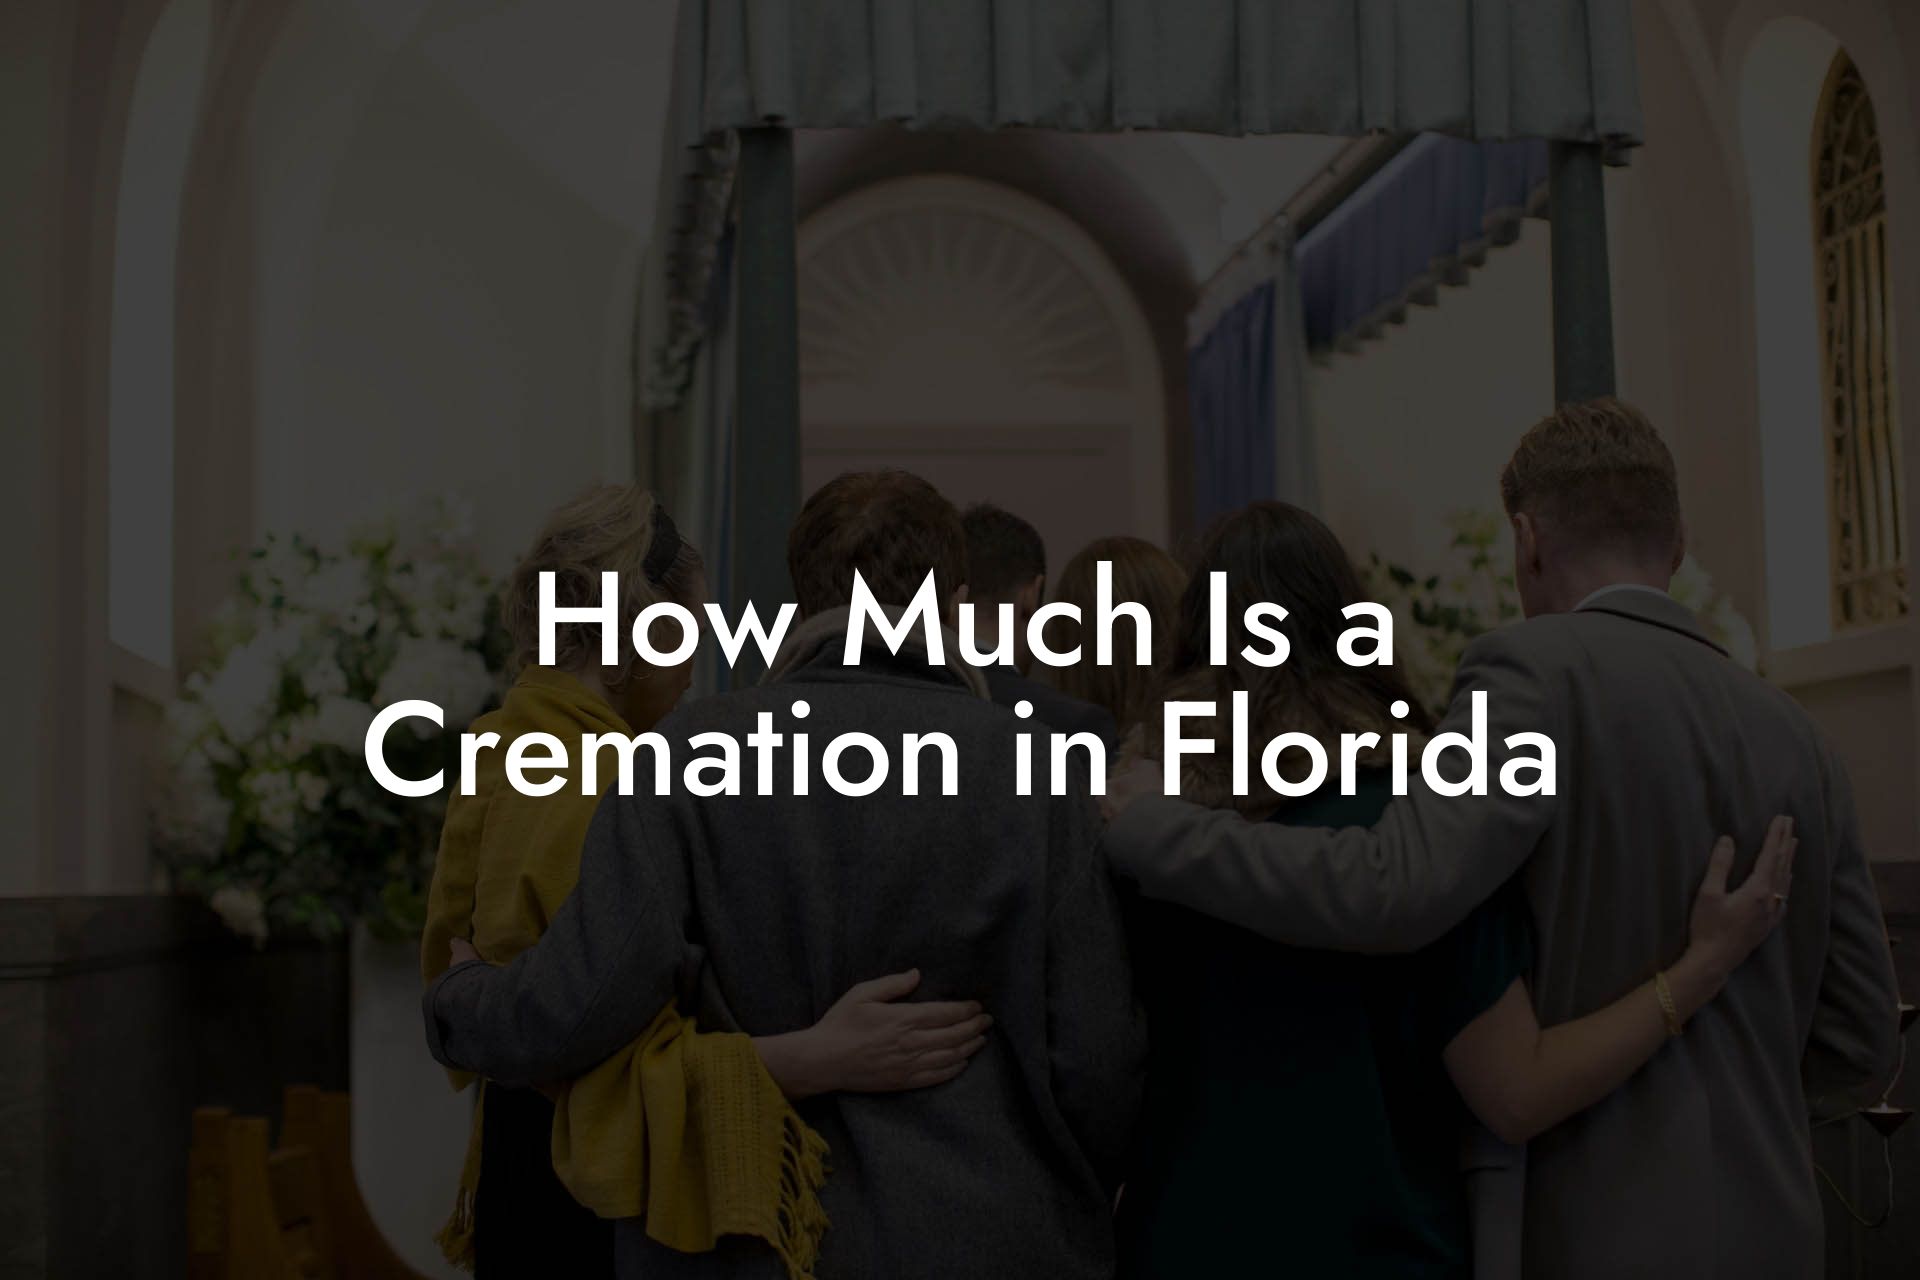 How Much Is a Cremation in Florida